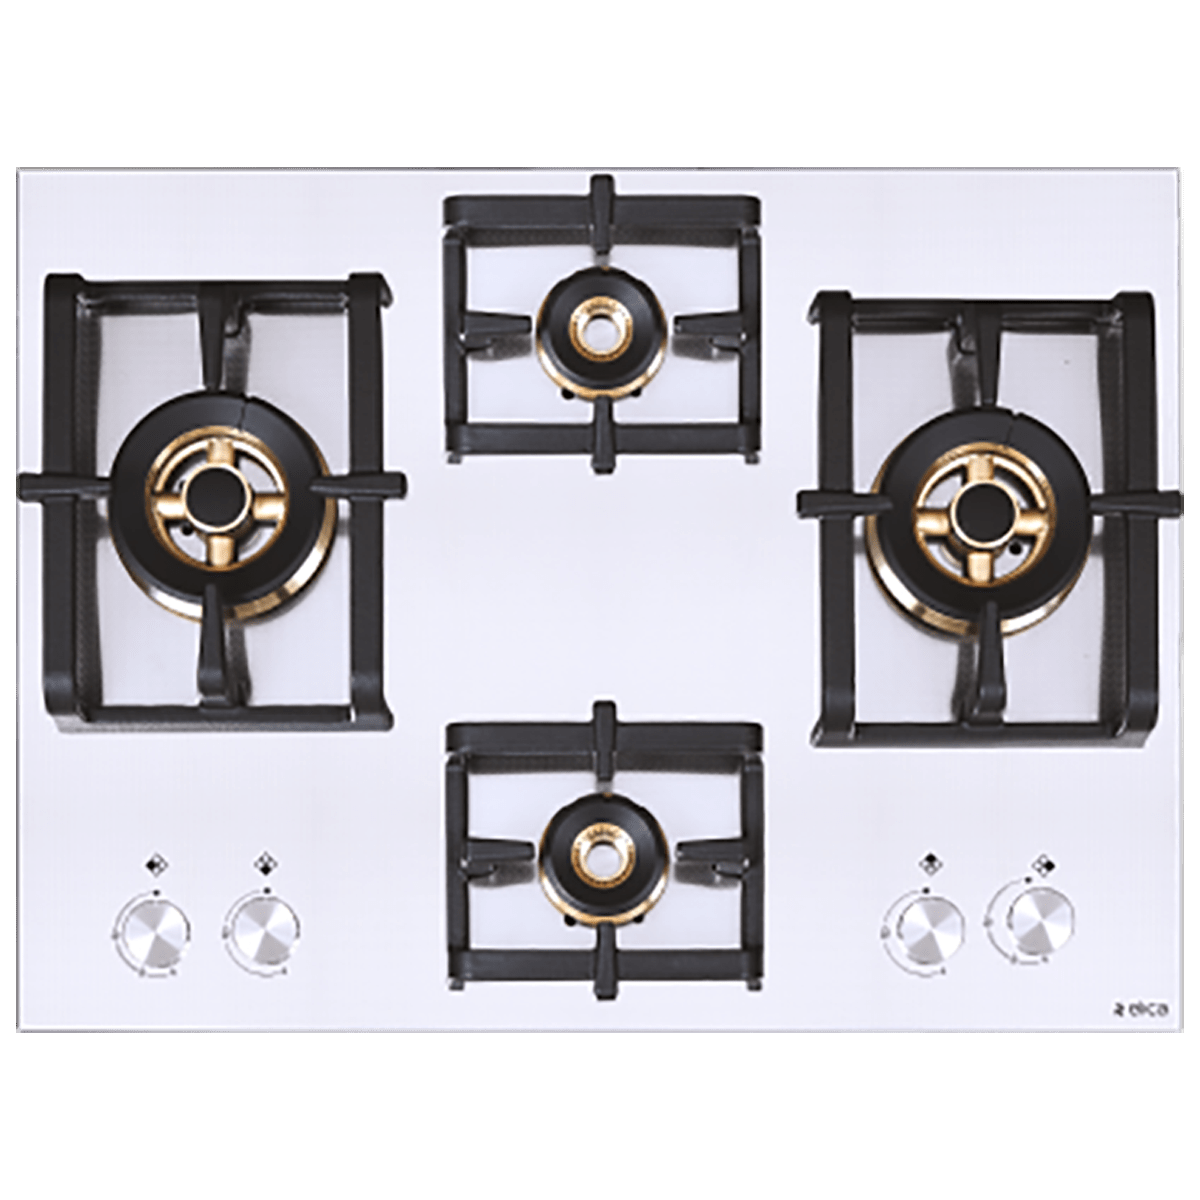 Elica Inox Pro FB MFC 4B 70 DX FFD 4 Burner Stainless Steel Built-in Gas Hob (Automatic Ignition, 3024, Steel)_1